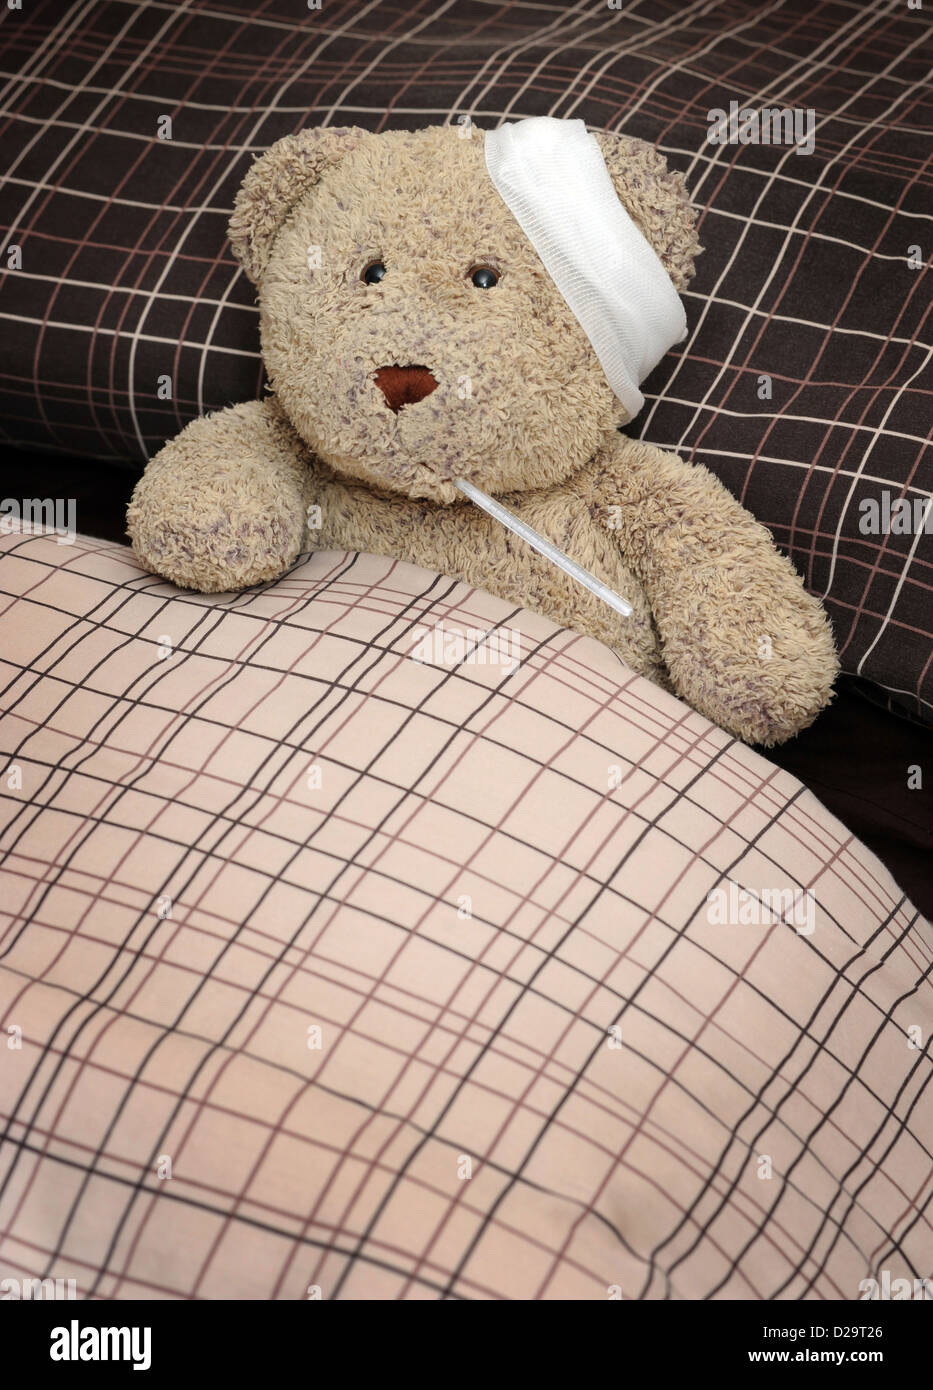 TEDDY BEAR IN BED WITH BANDAGE AND THERMOMETER RE ILLNESS MAN FLU SICKNESS THROWING A SICKIE TIME OFF WORK WORKERS DAY WELL UK Stock Photo